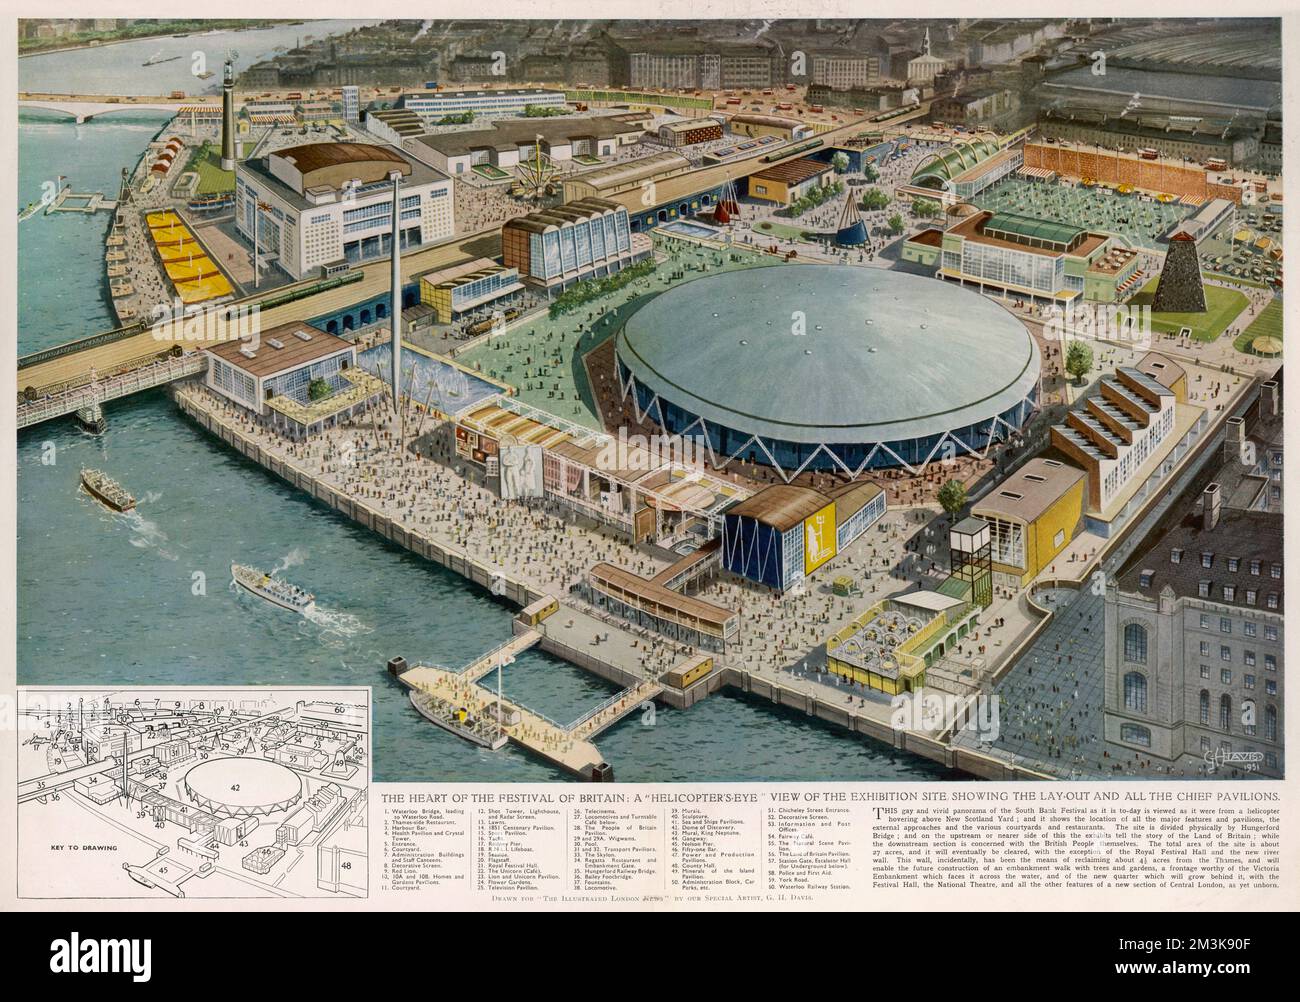 Aerial view of the exhibition site of the 1951 Festival of Britain on London's South Bank showing the Dome of Discovery, The Skylon and other pavilions.  12 May 1951 Stock Photo